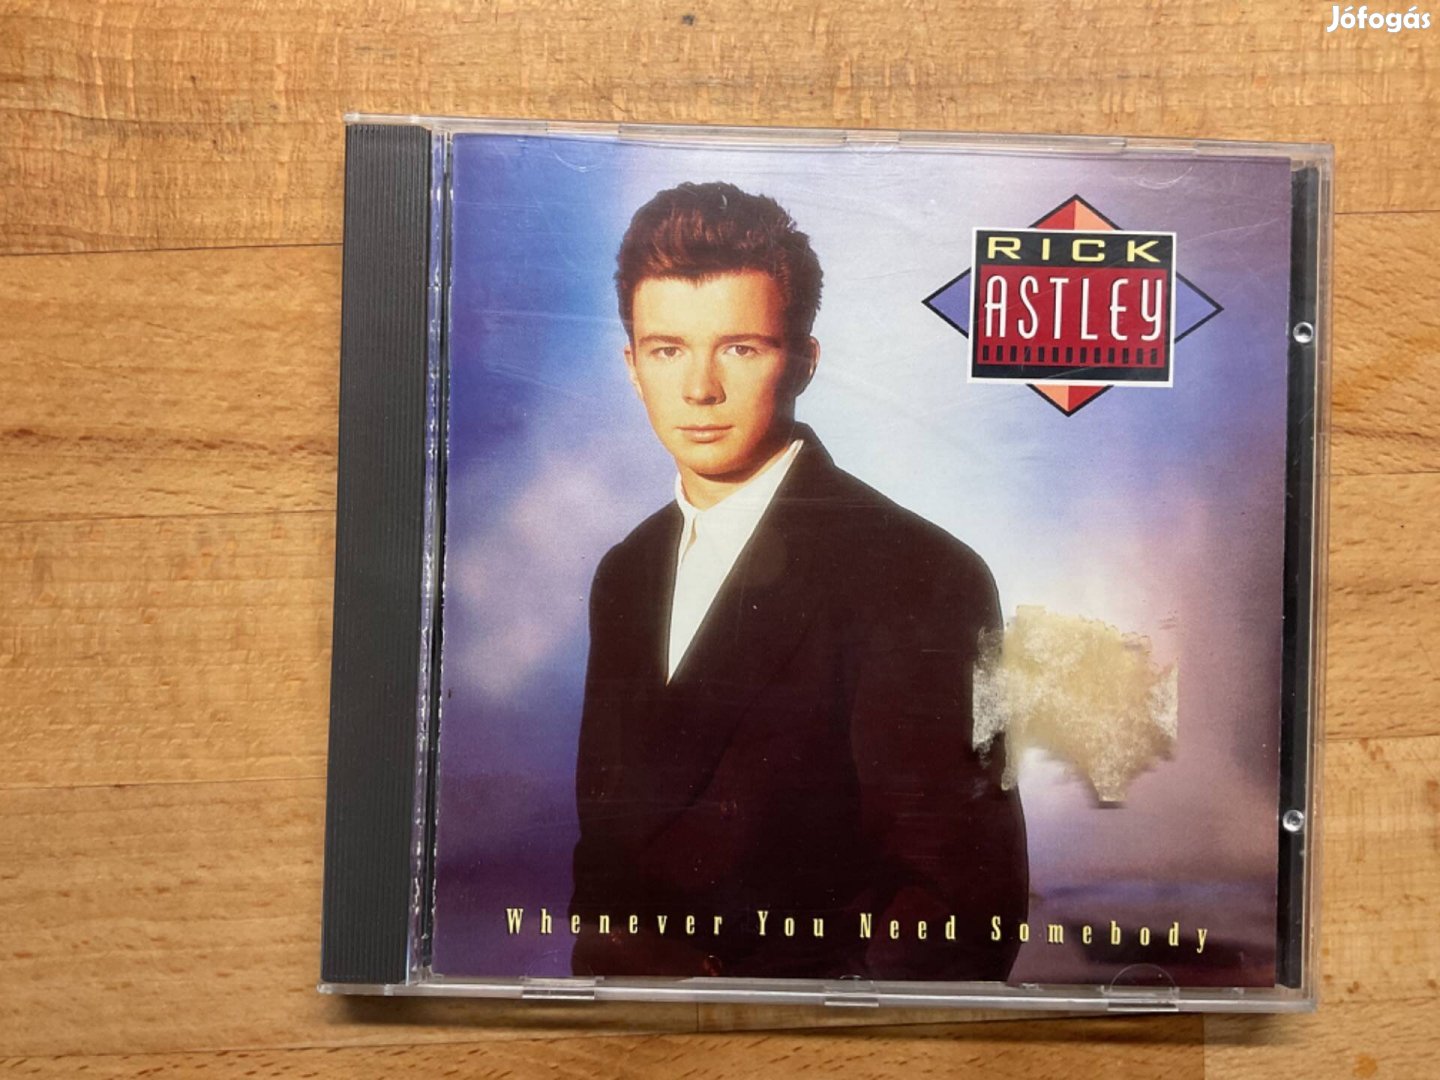 Rick Astley - Whenever You Need Somebody, cd lemez